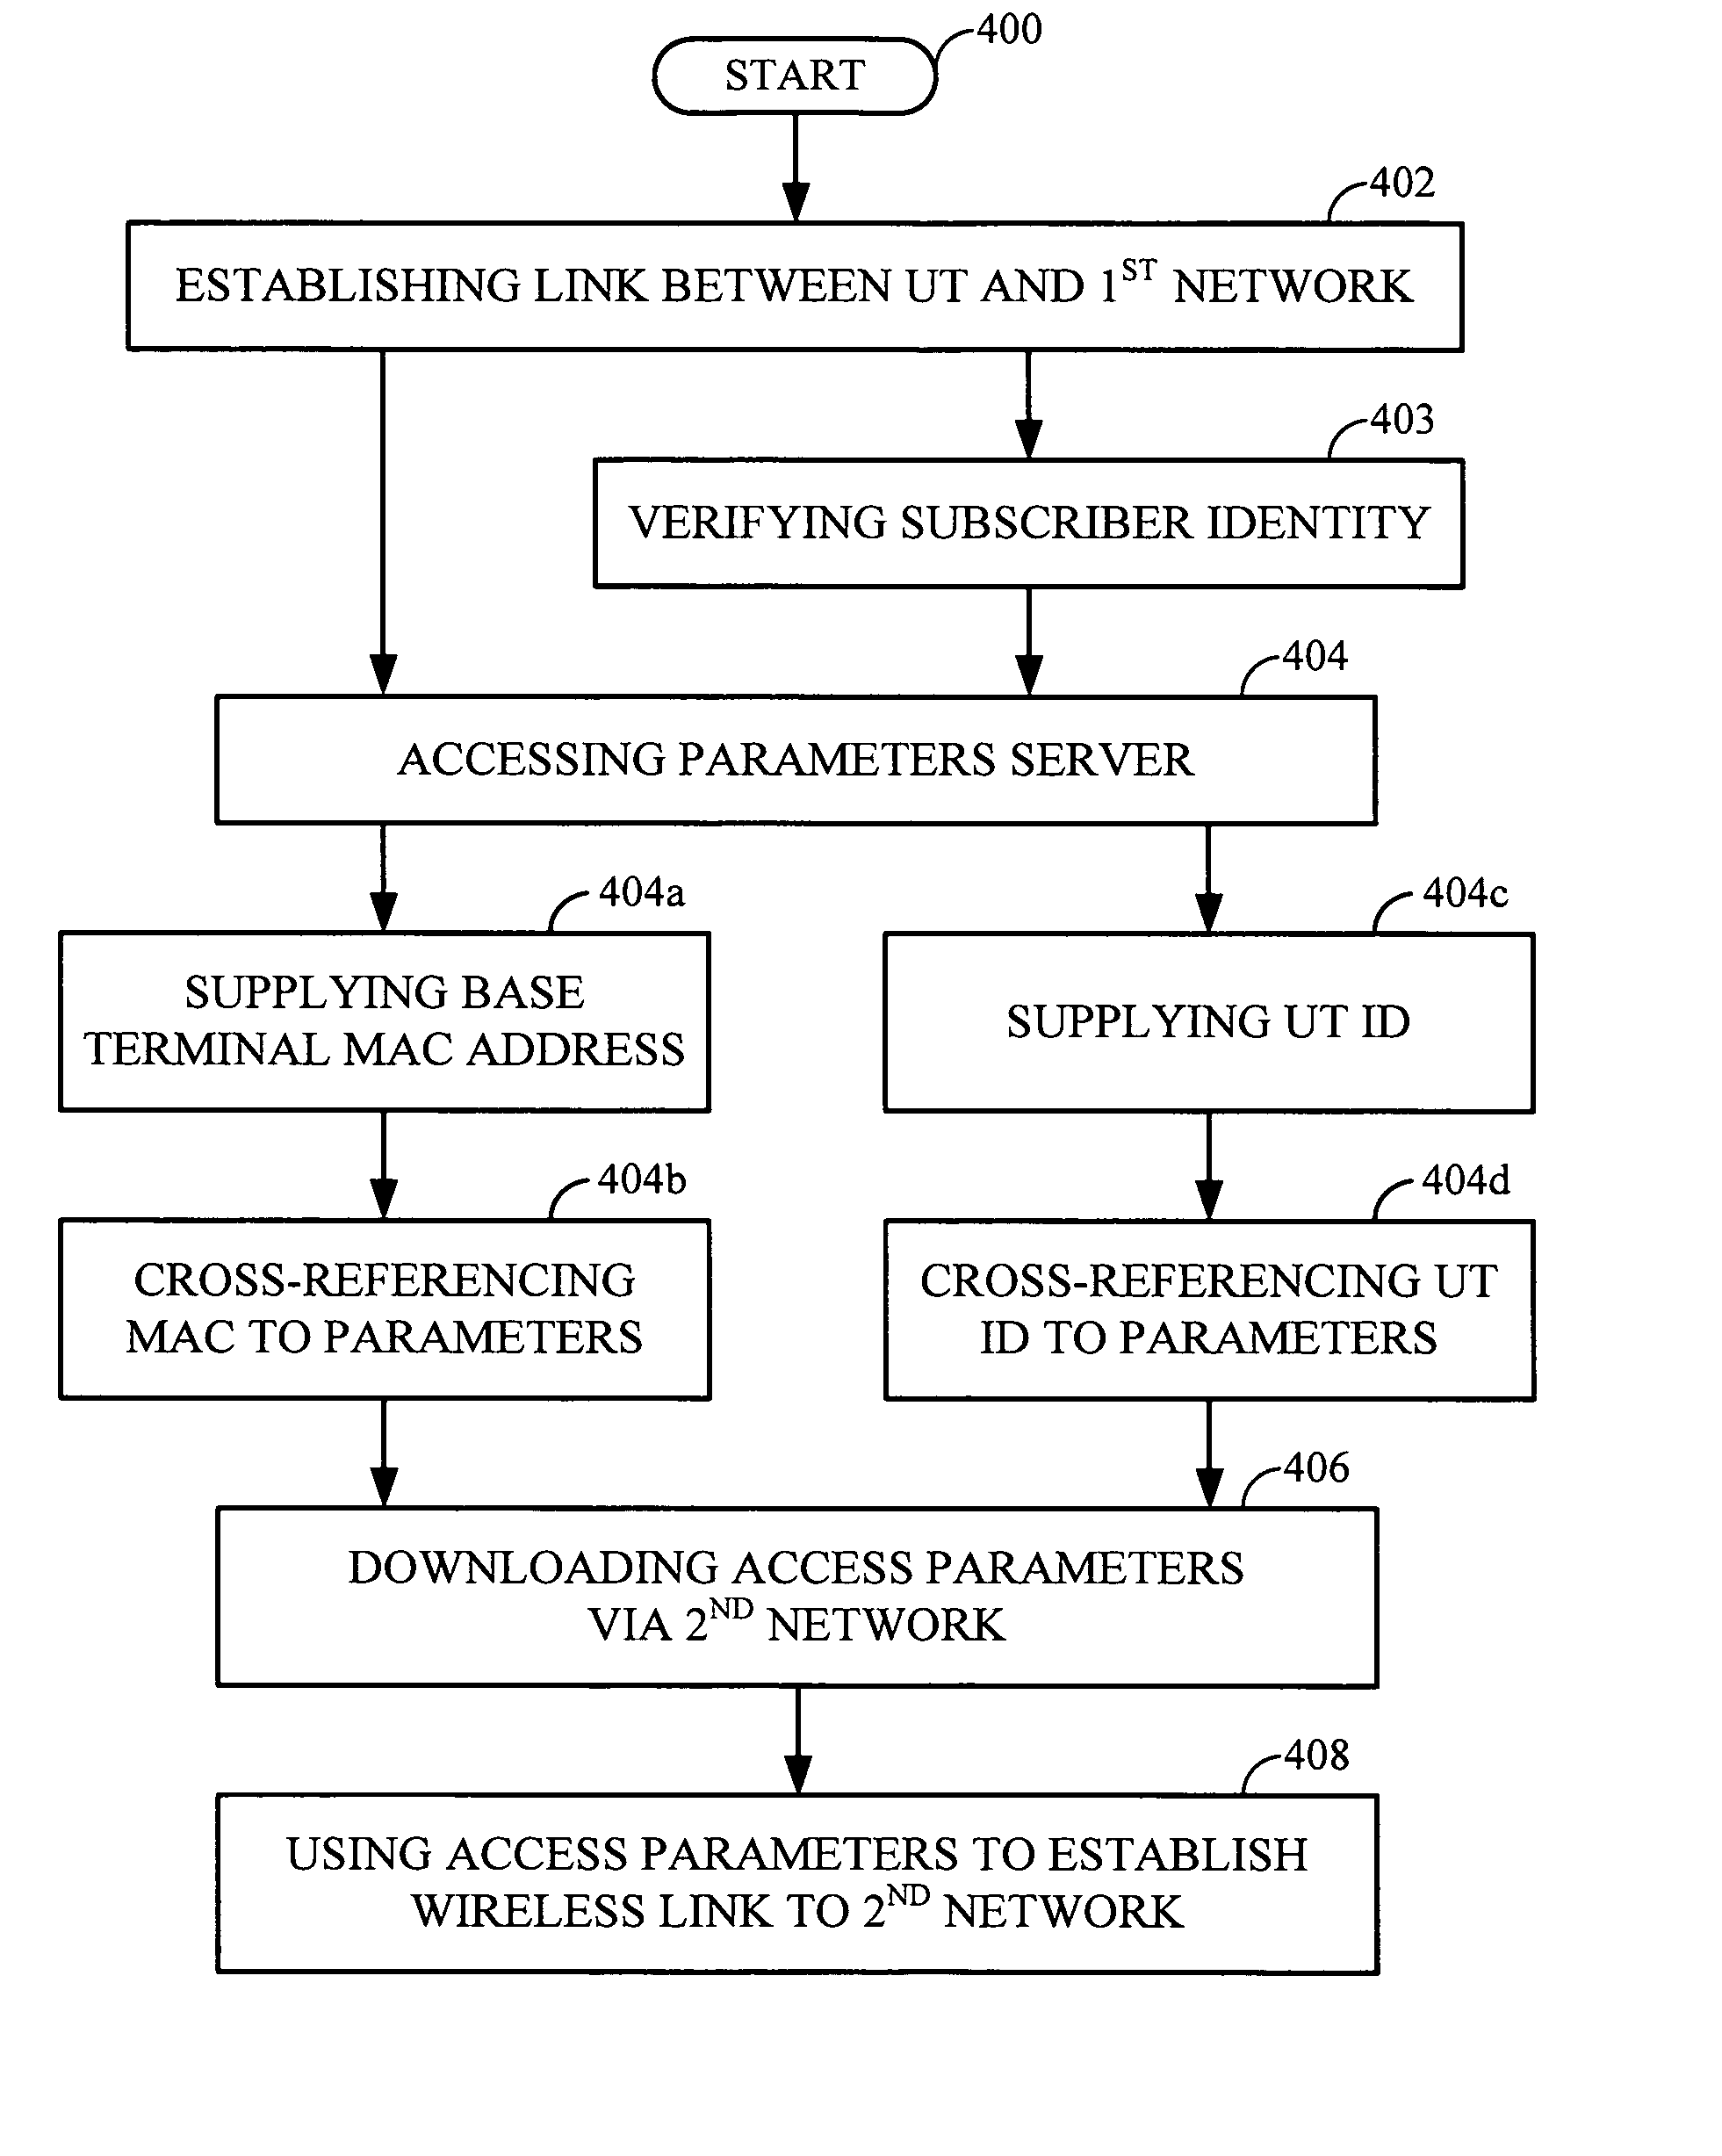 System and method for distributing wireless network access parameters